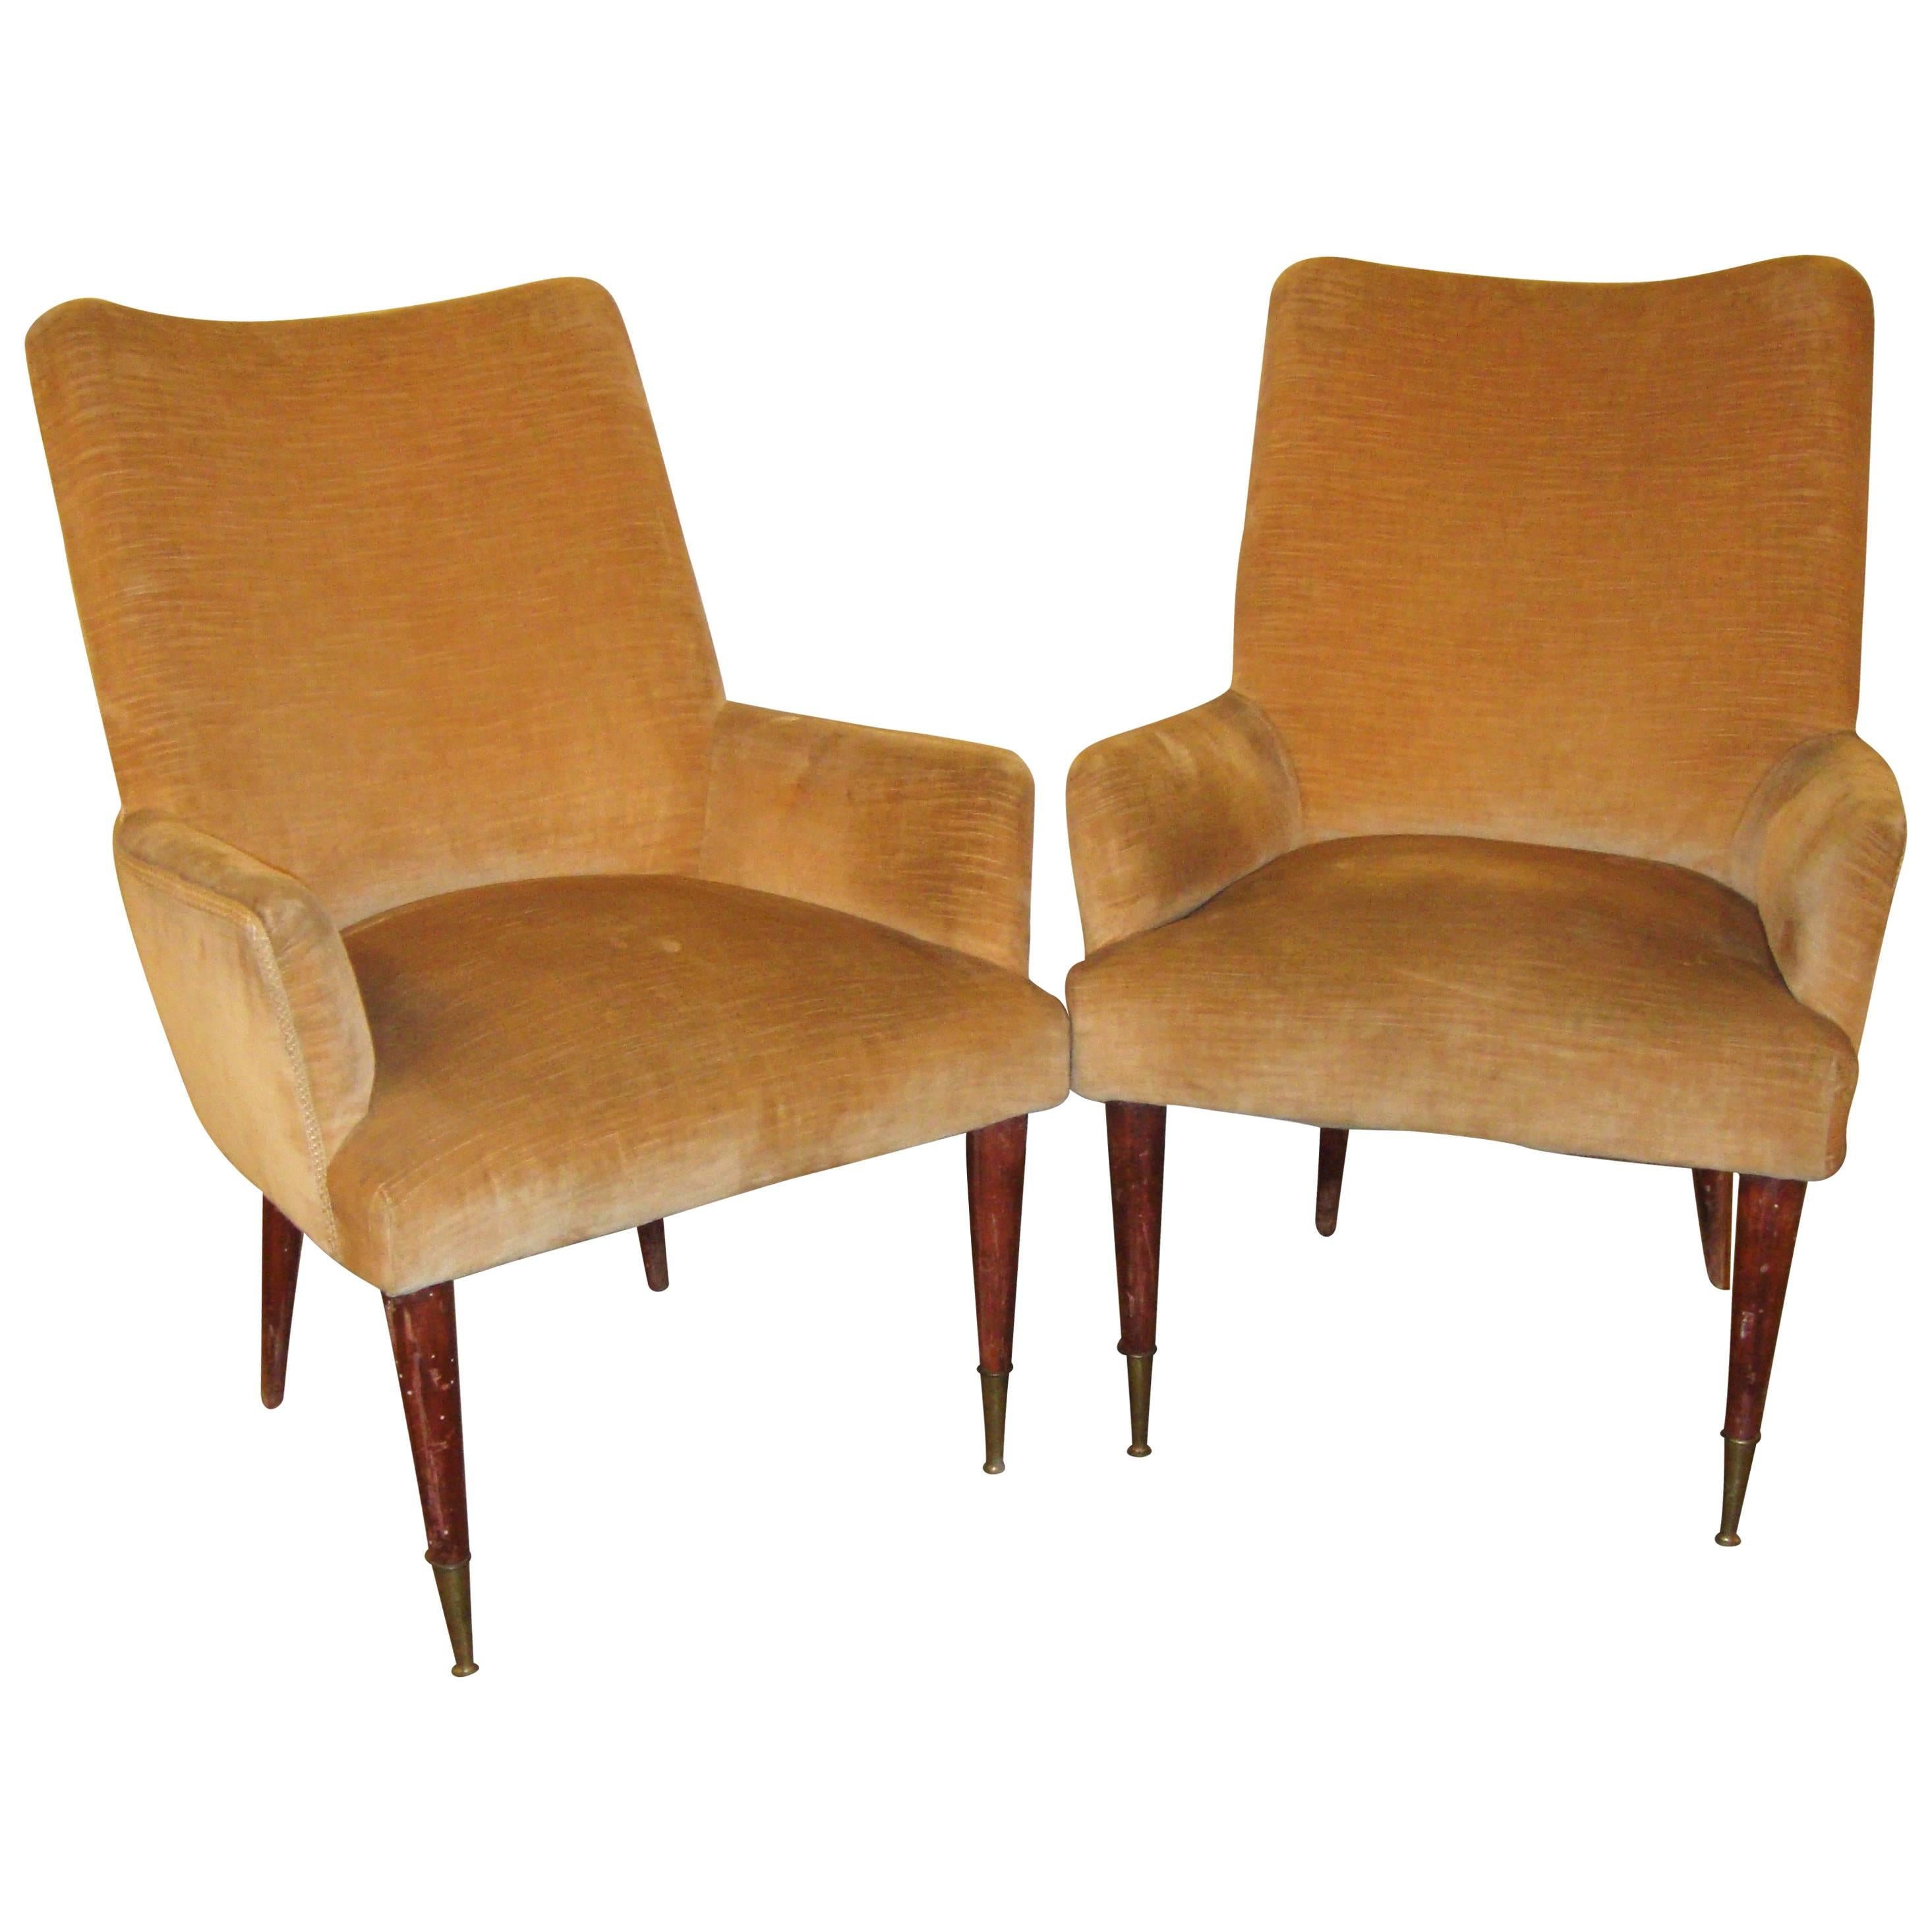 Pair of Art Deco Style Armchairs